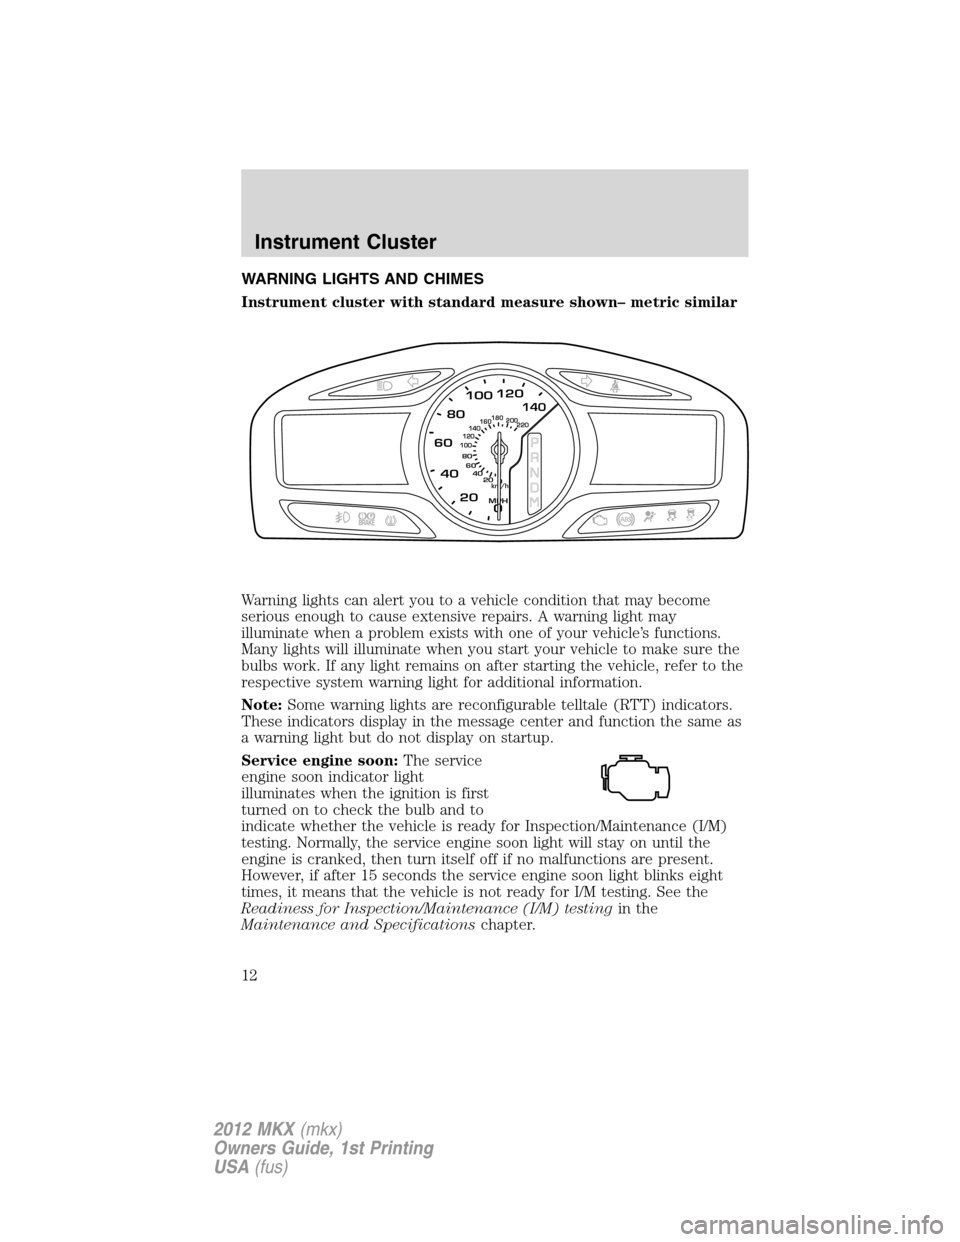 LINCOLN MKX 2012 User Guide WARNING LIGHTS AND CHIMES
Instrument cluster with standard measure shown– metric similar
Warning lights can alert you to a vehicle condition that may become
serious enough to cause extensive repairs